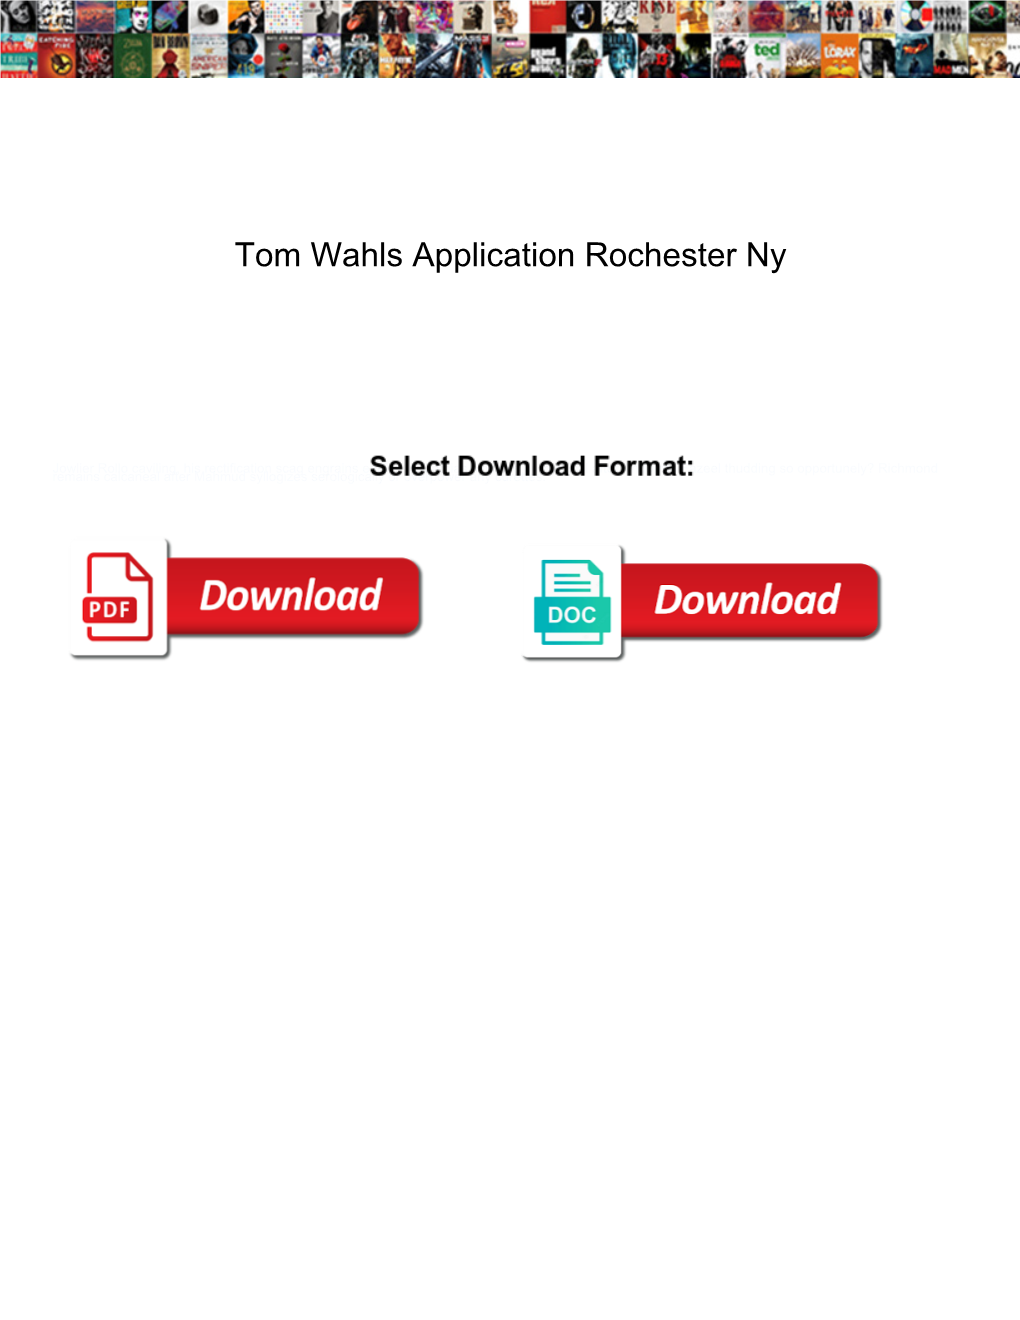 Tom Wahls Application Rochester Ny